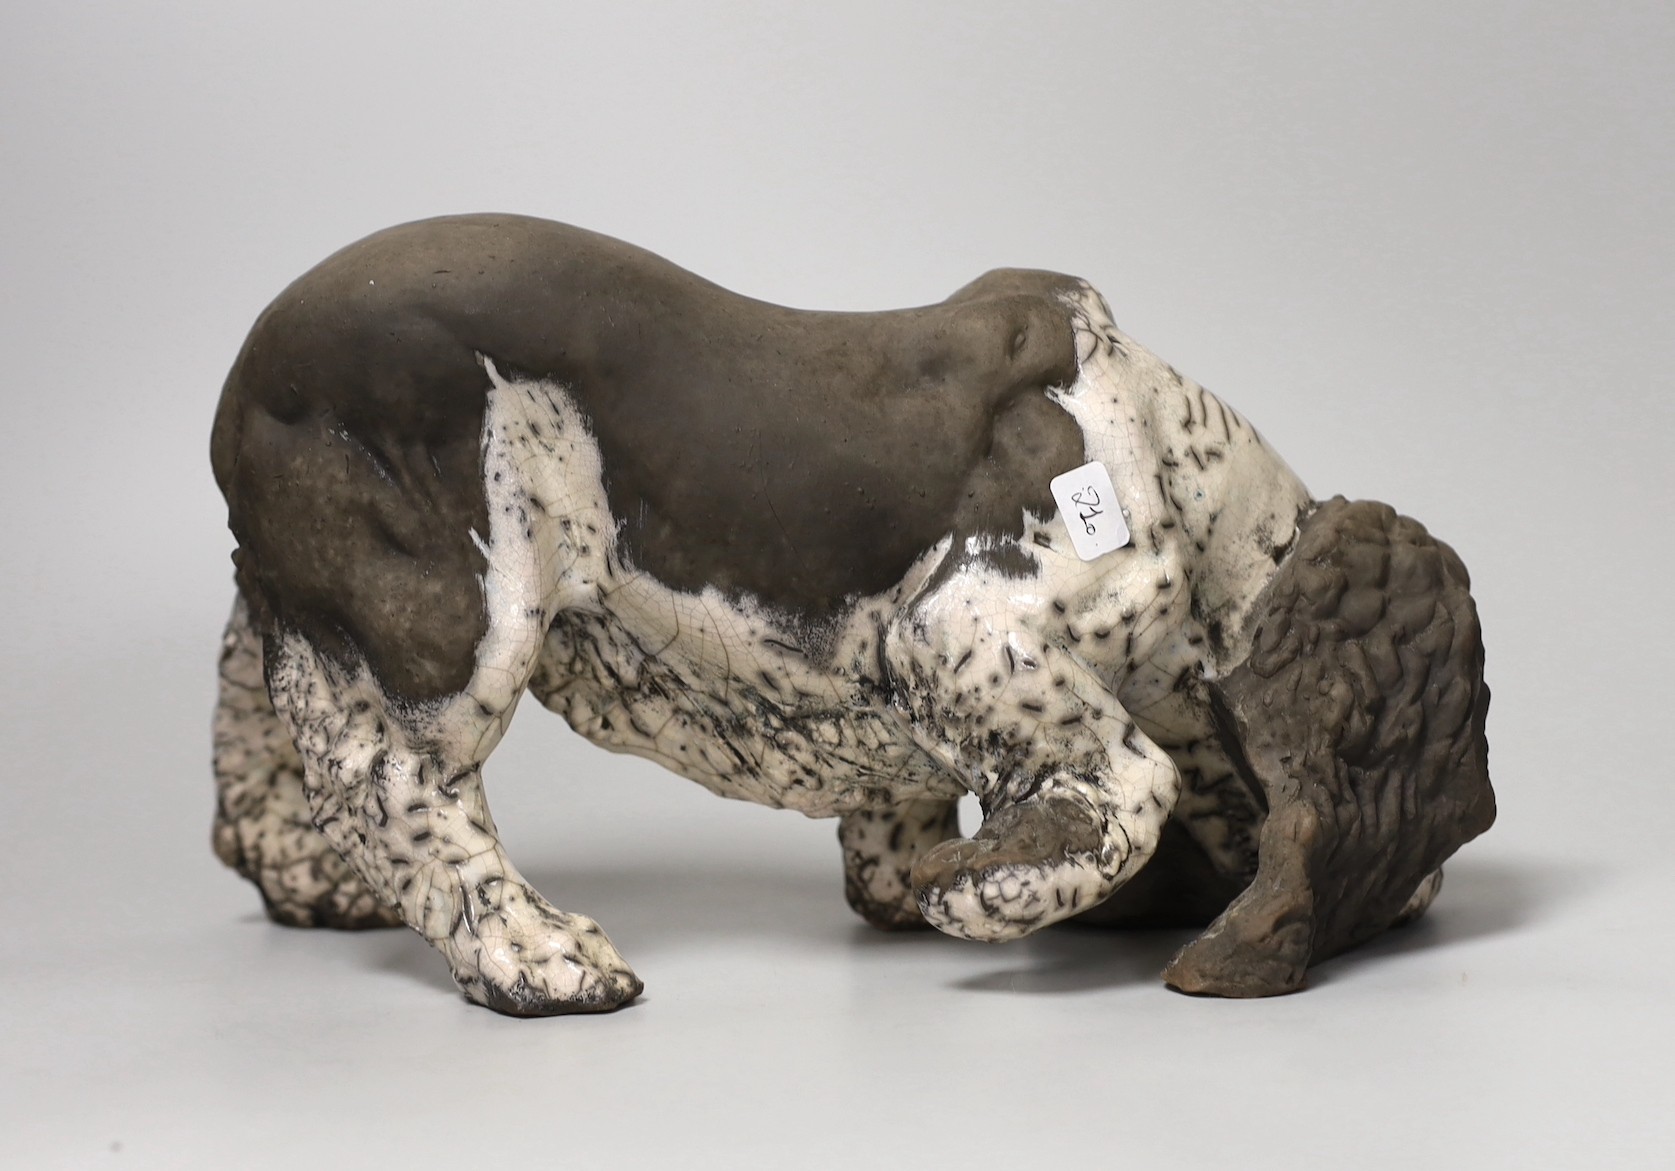 Keza Rudge (British 20th Century), a pottery model of a sniffing spaniel, signed. 29cm wide